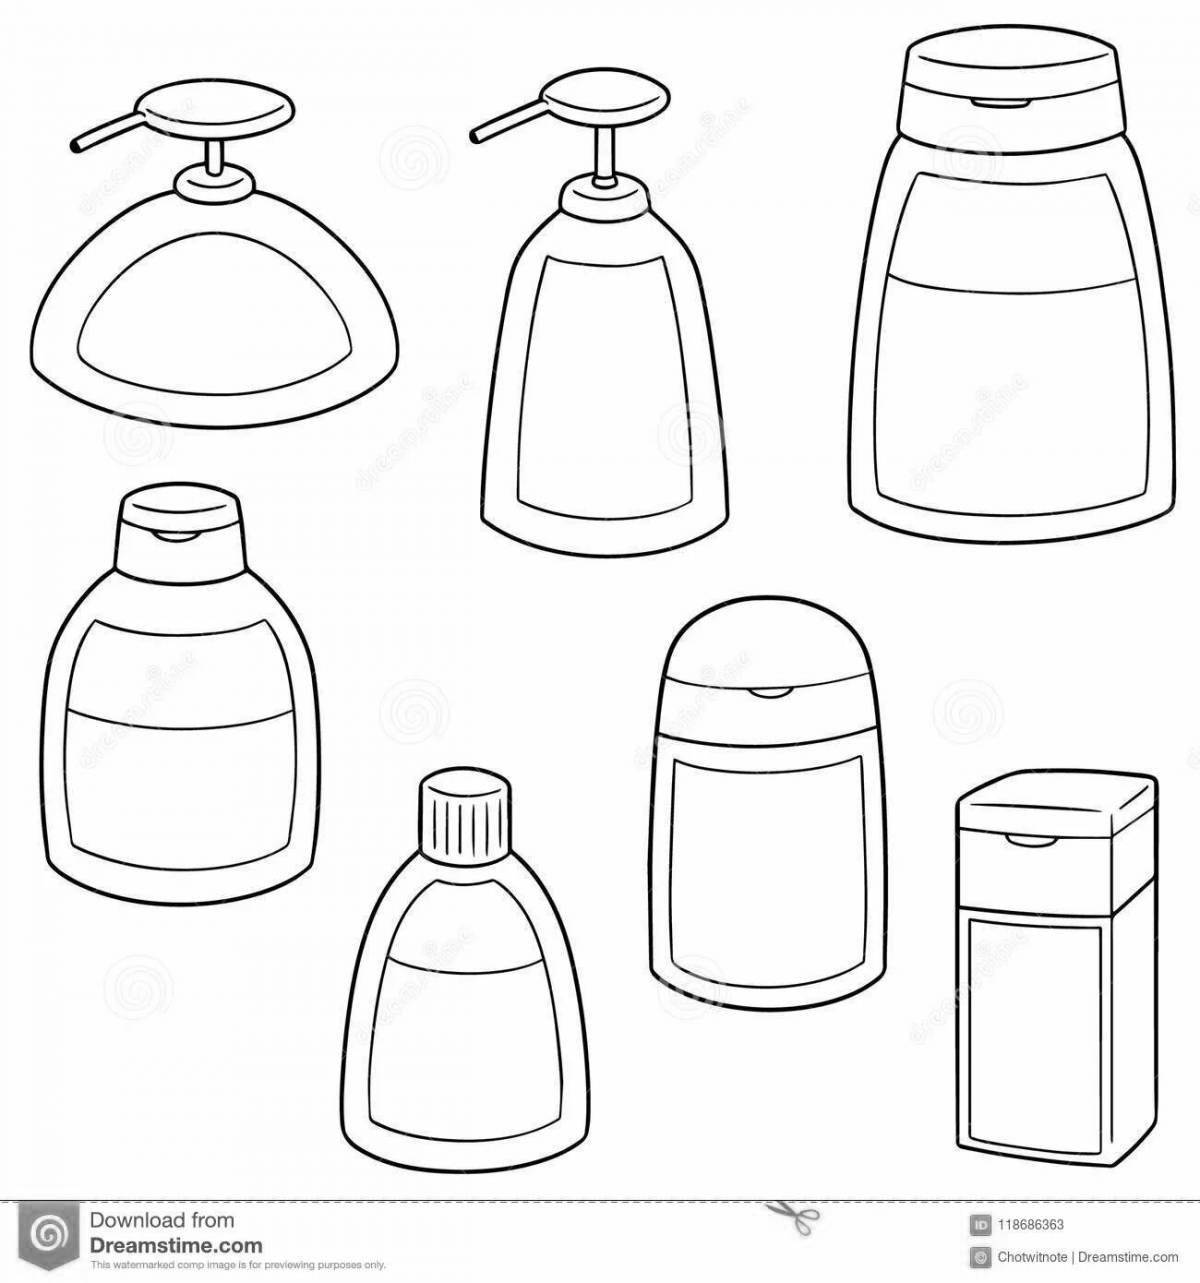 Animated shampoo coloring page